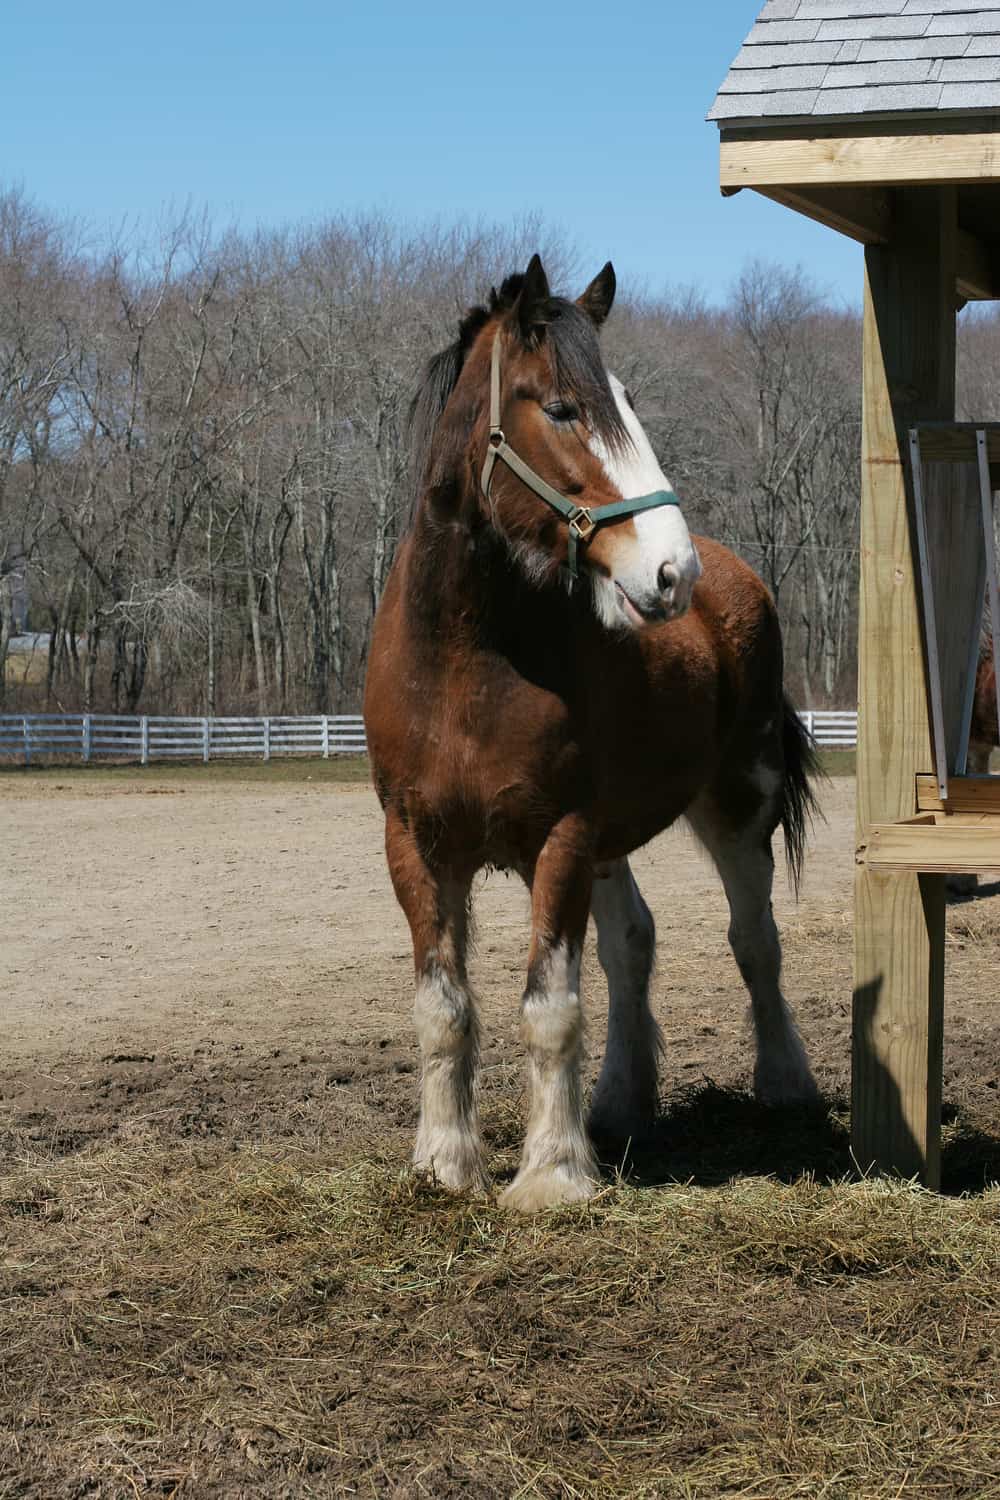 Factors that influence the price of a Clydesdale horse